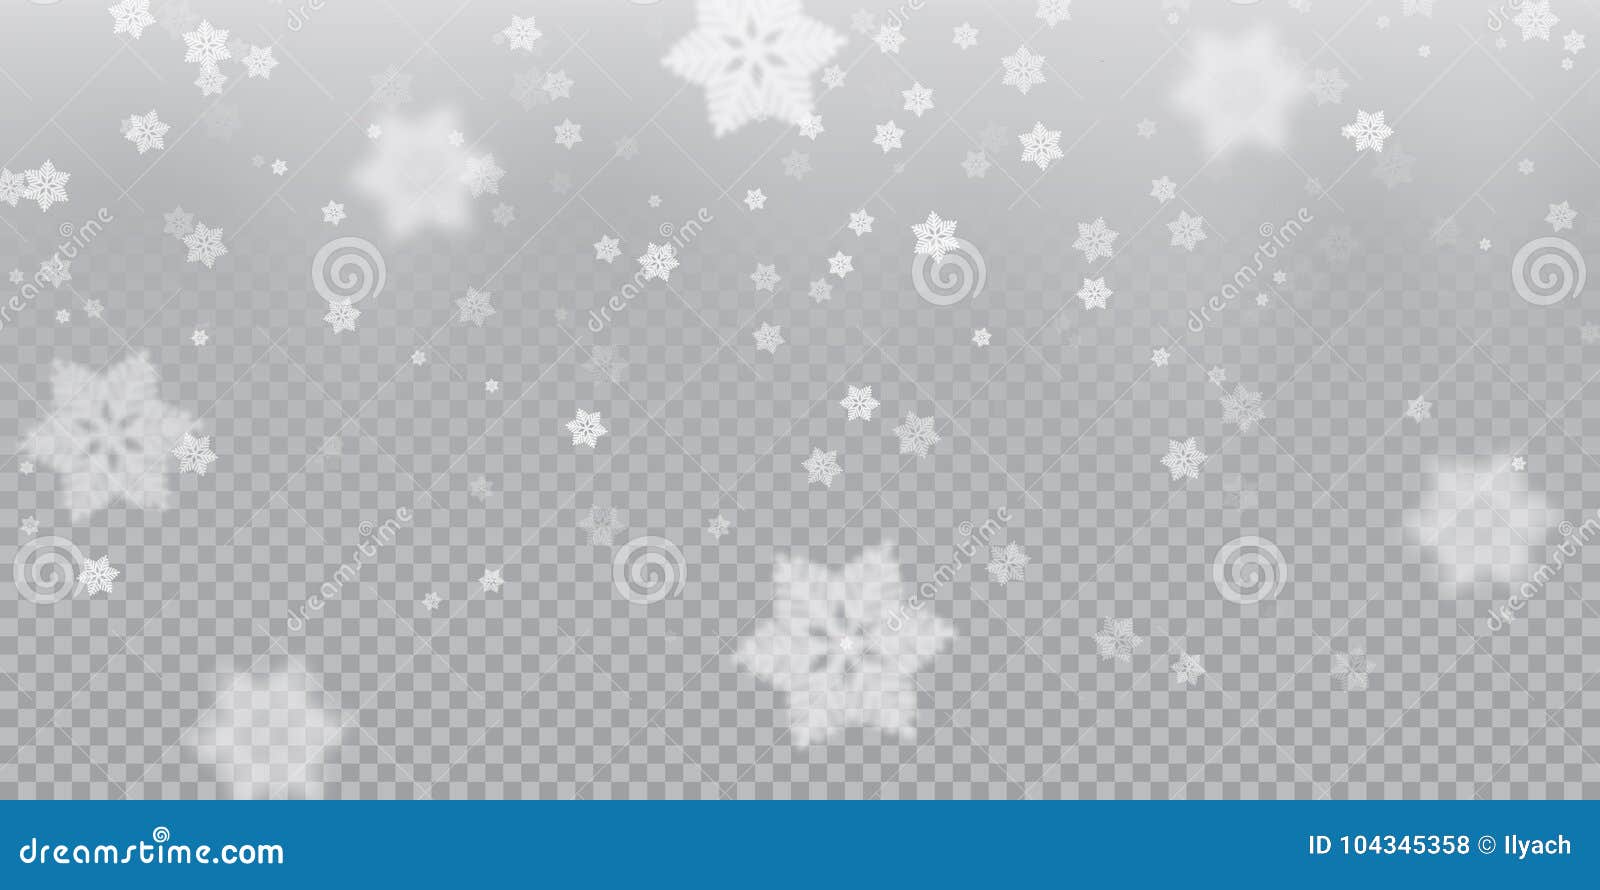 Premium Vector  Pattern with blue and silver snowflakes on a white  background new years texture